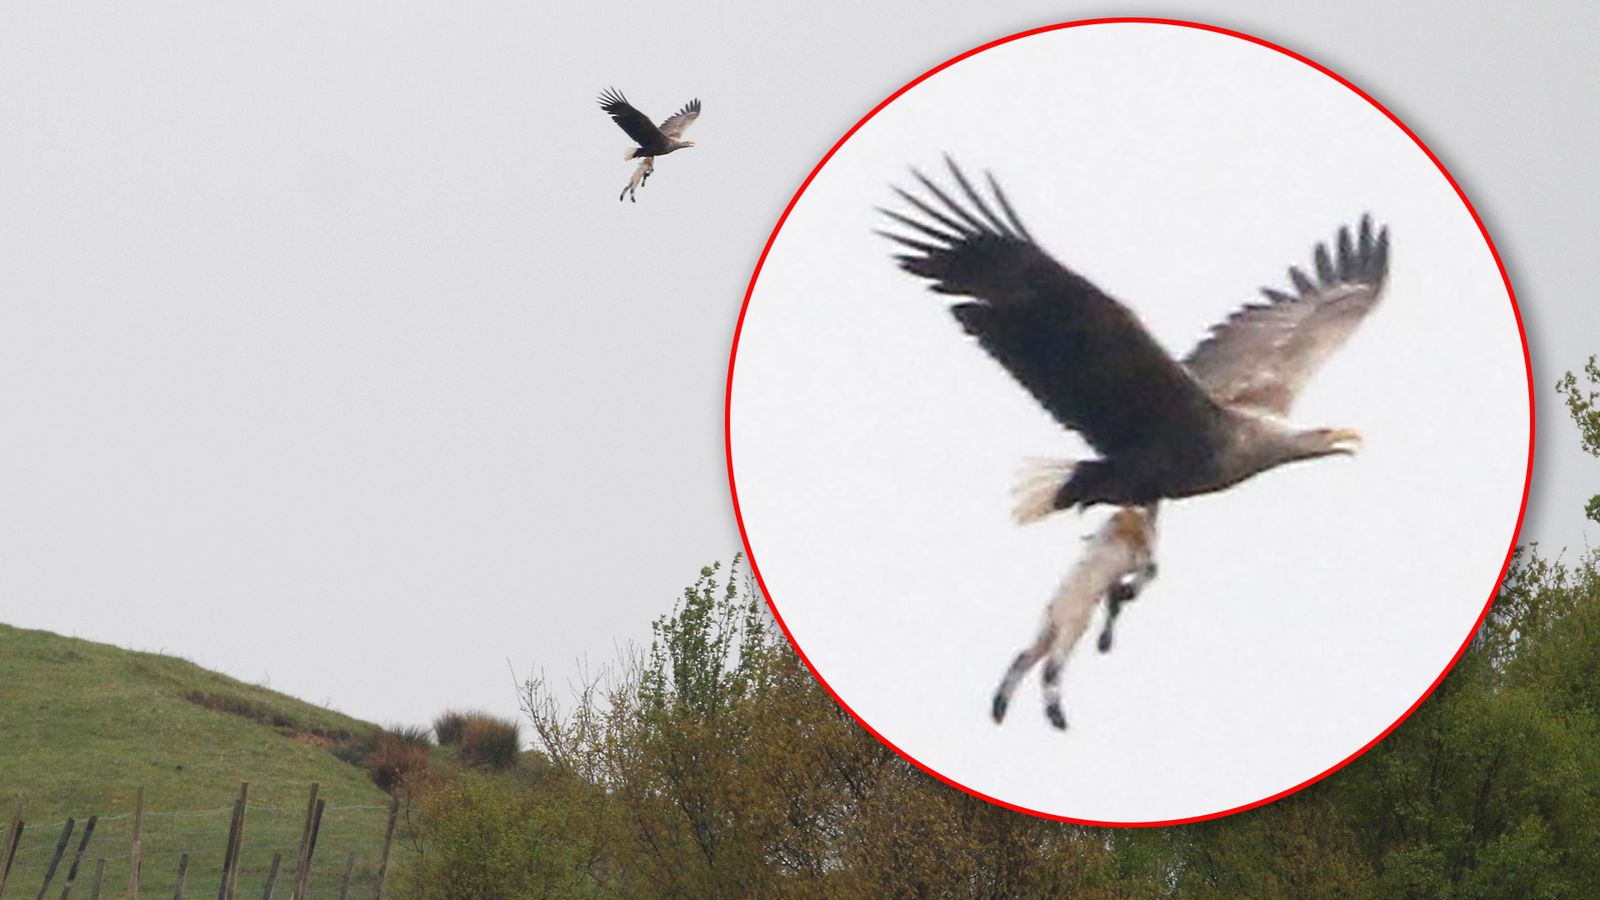 White Tailed Eagles in Dorset, and MP Chris Loder’s odd tweets